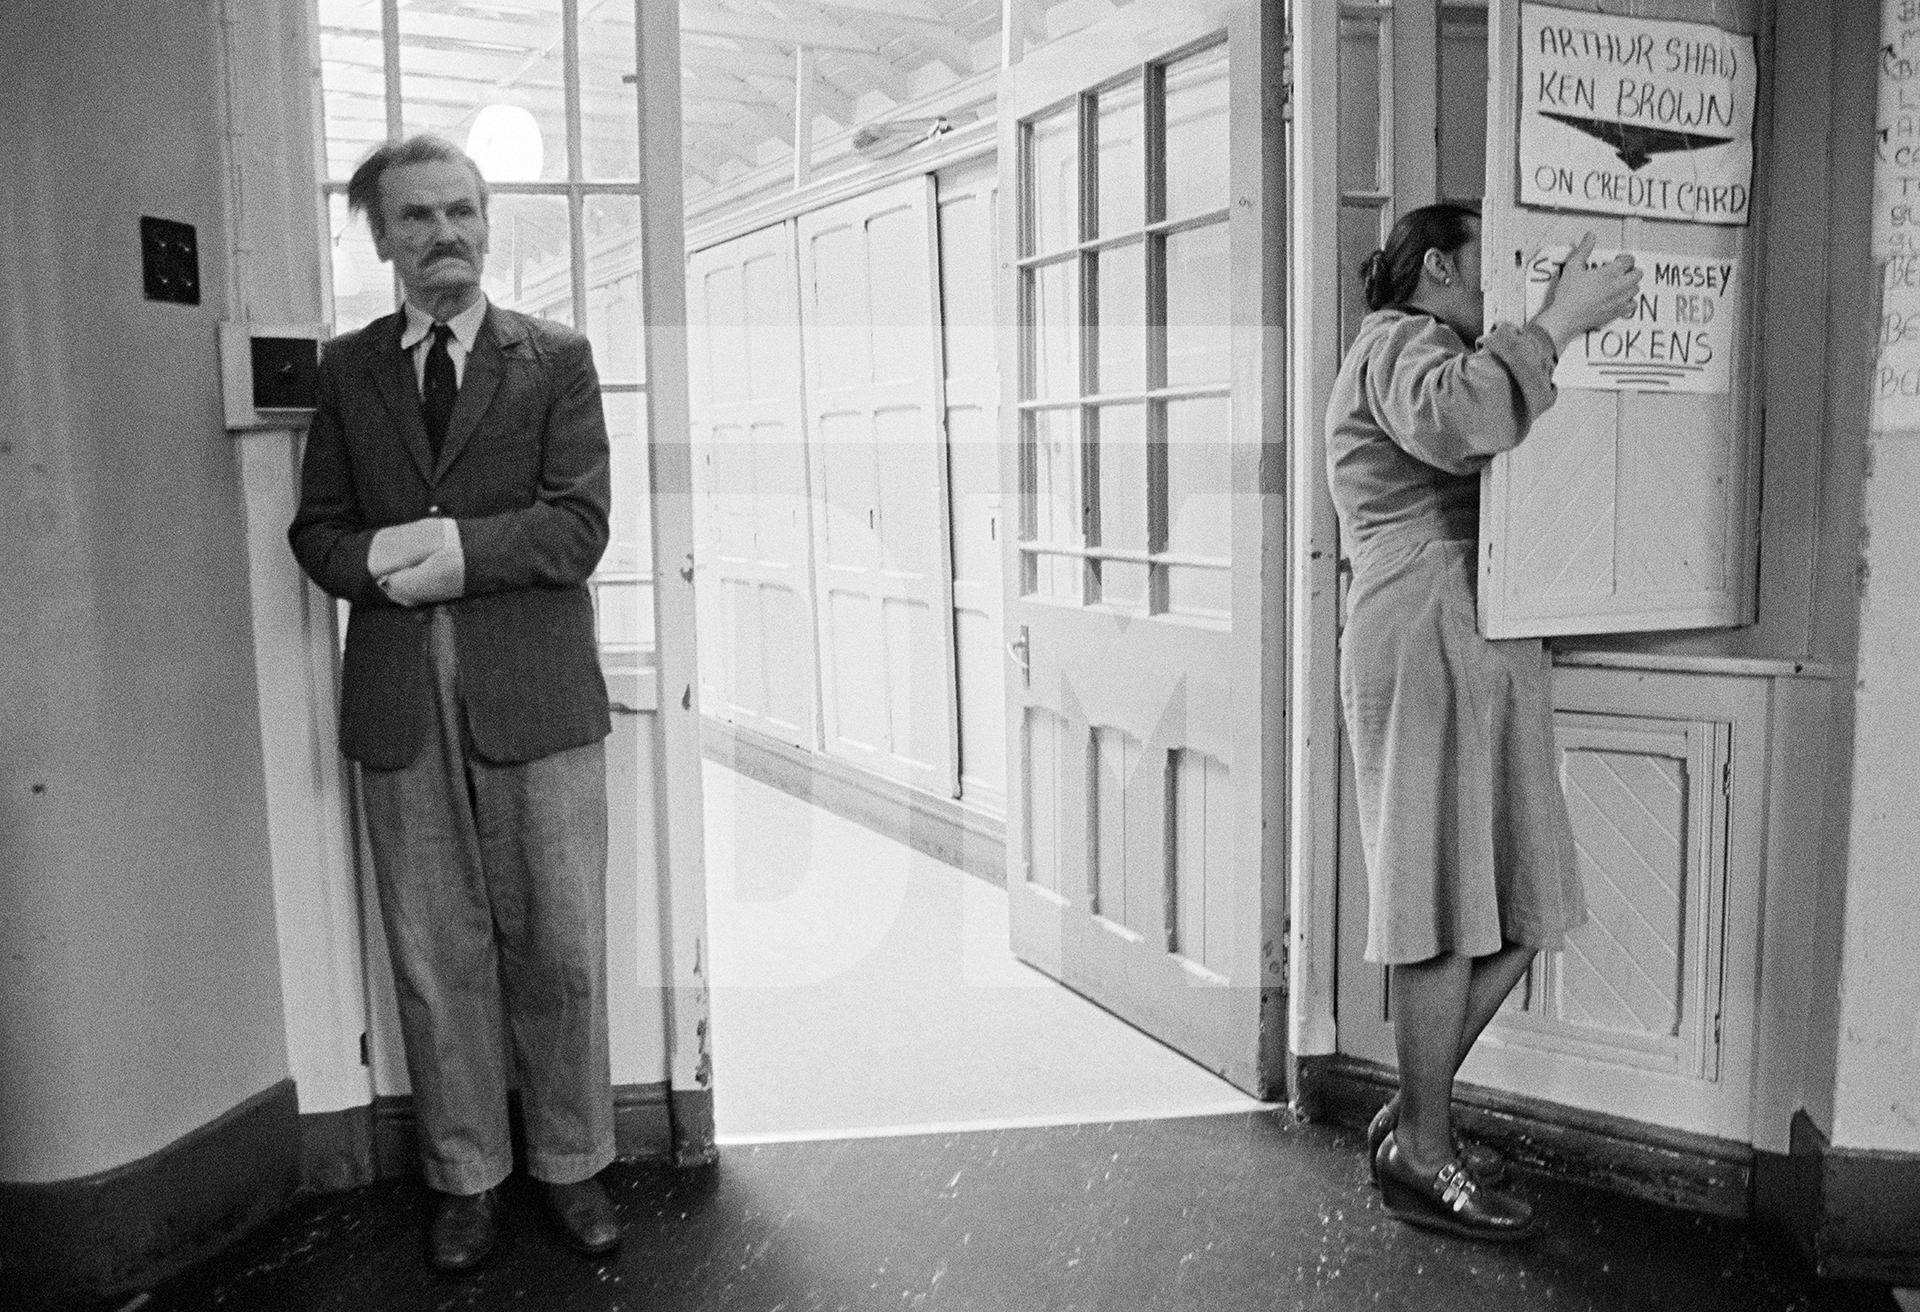 John Keeley, aged 63, stands in the day-room corridor while a nurse searches a cupboard. February 1978 by Daniel Meadows